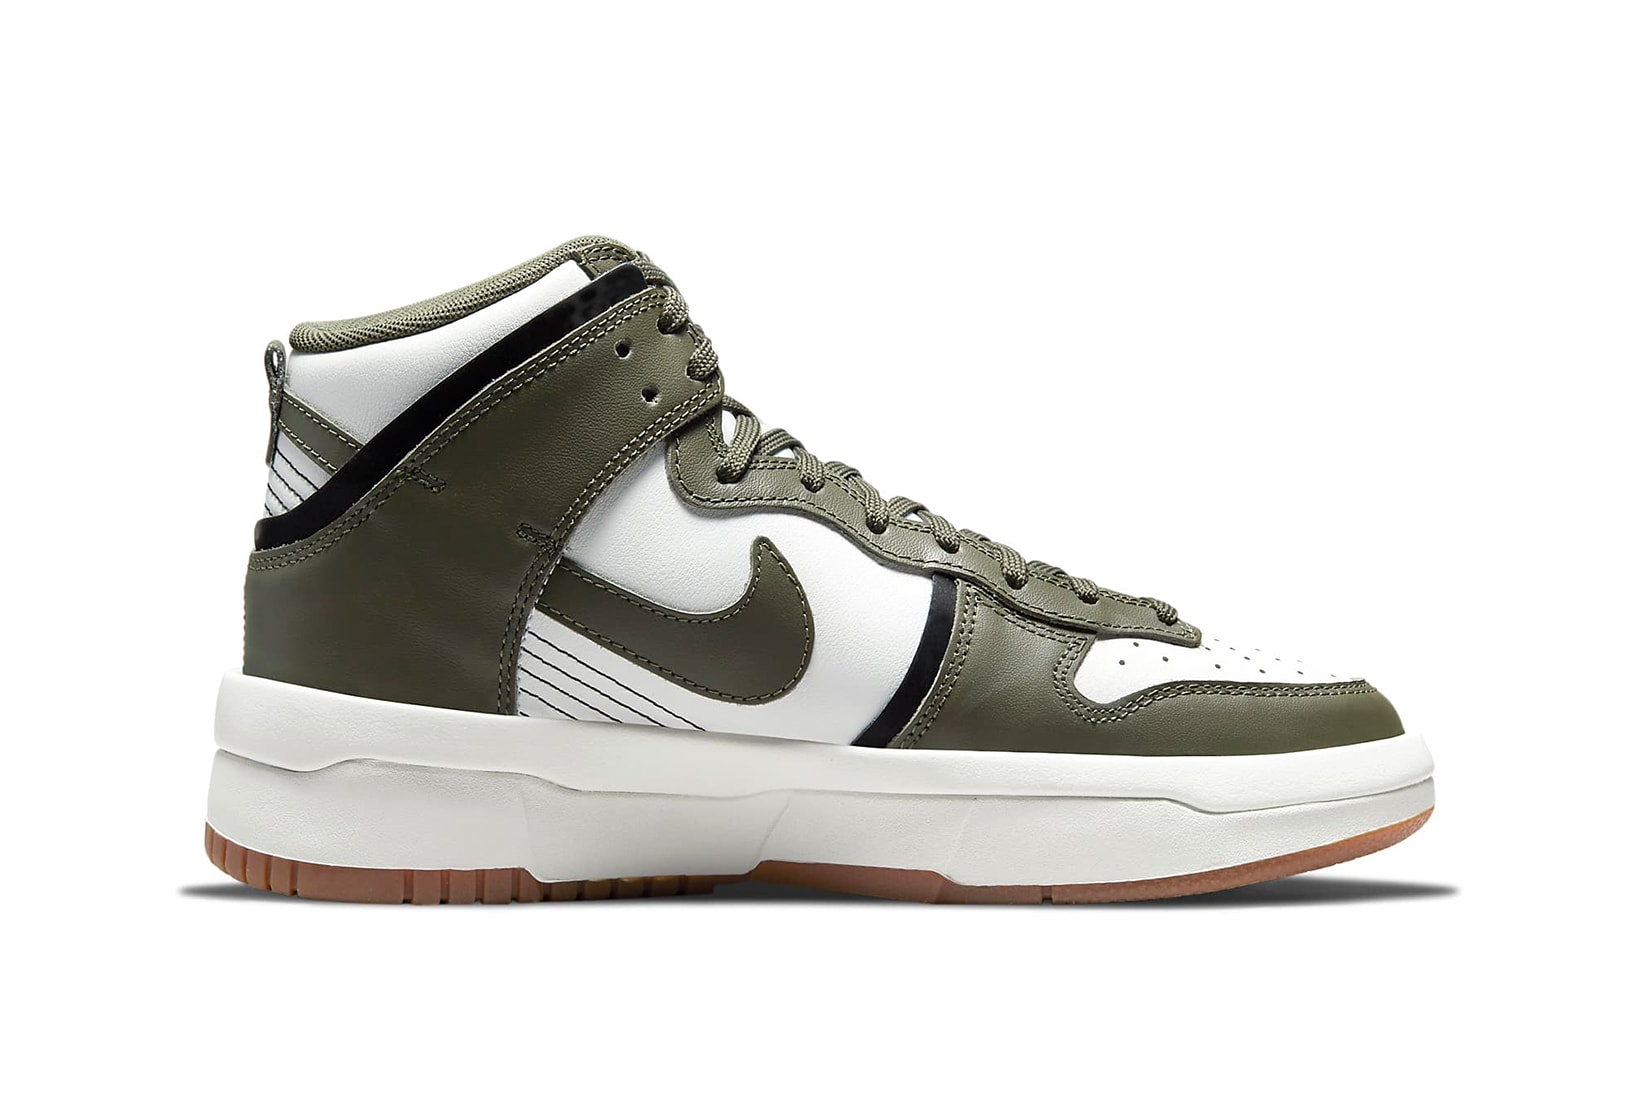 Another Side View of The Nike Dunk High Up Cargo Khaki